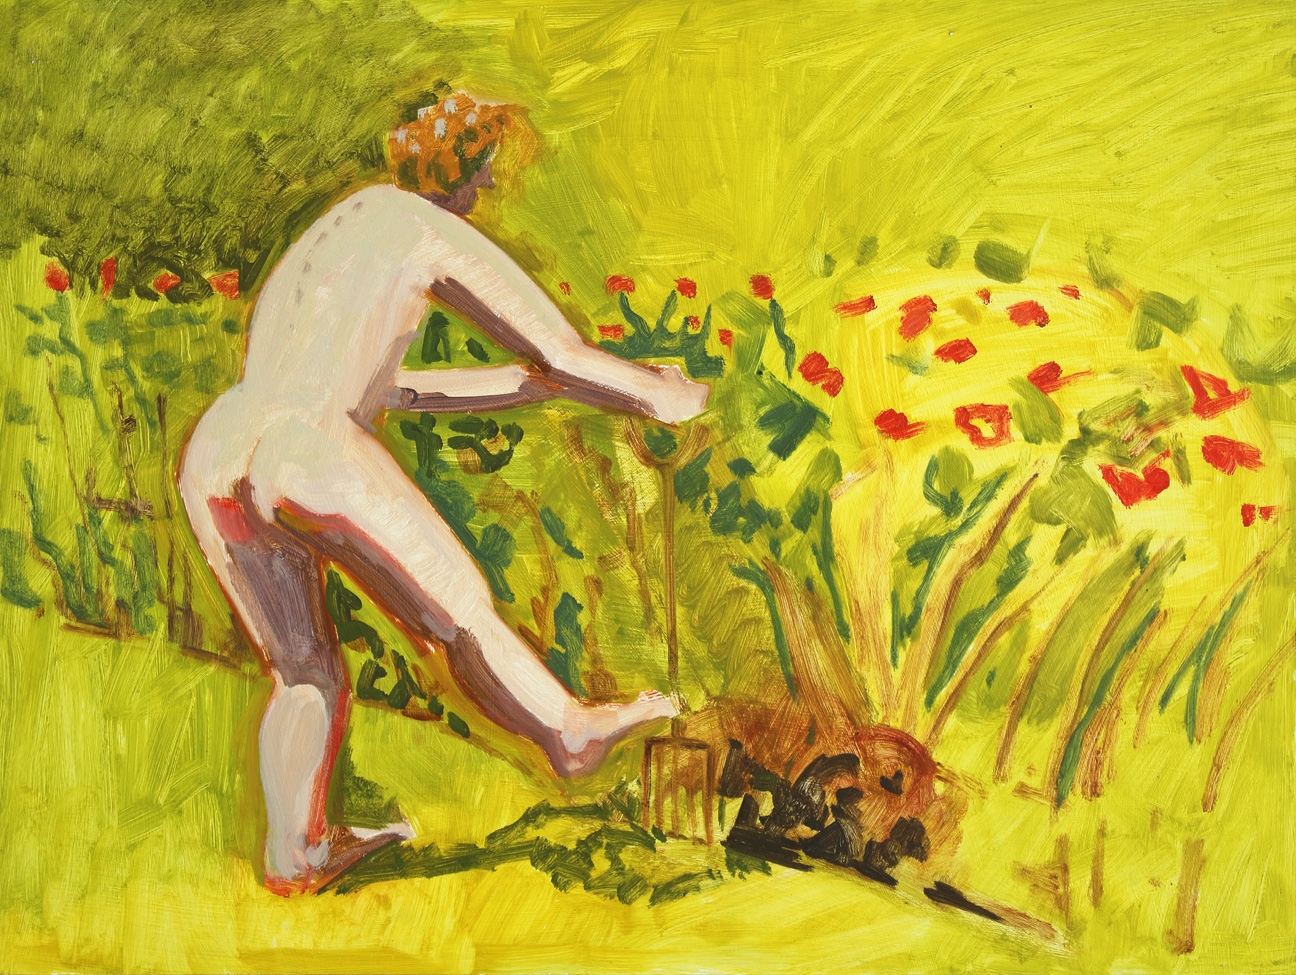 Lois Dodd, Digging Up Red Flowers